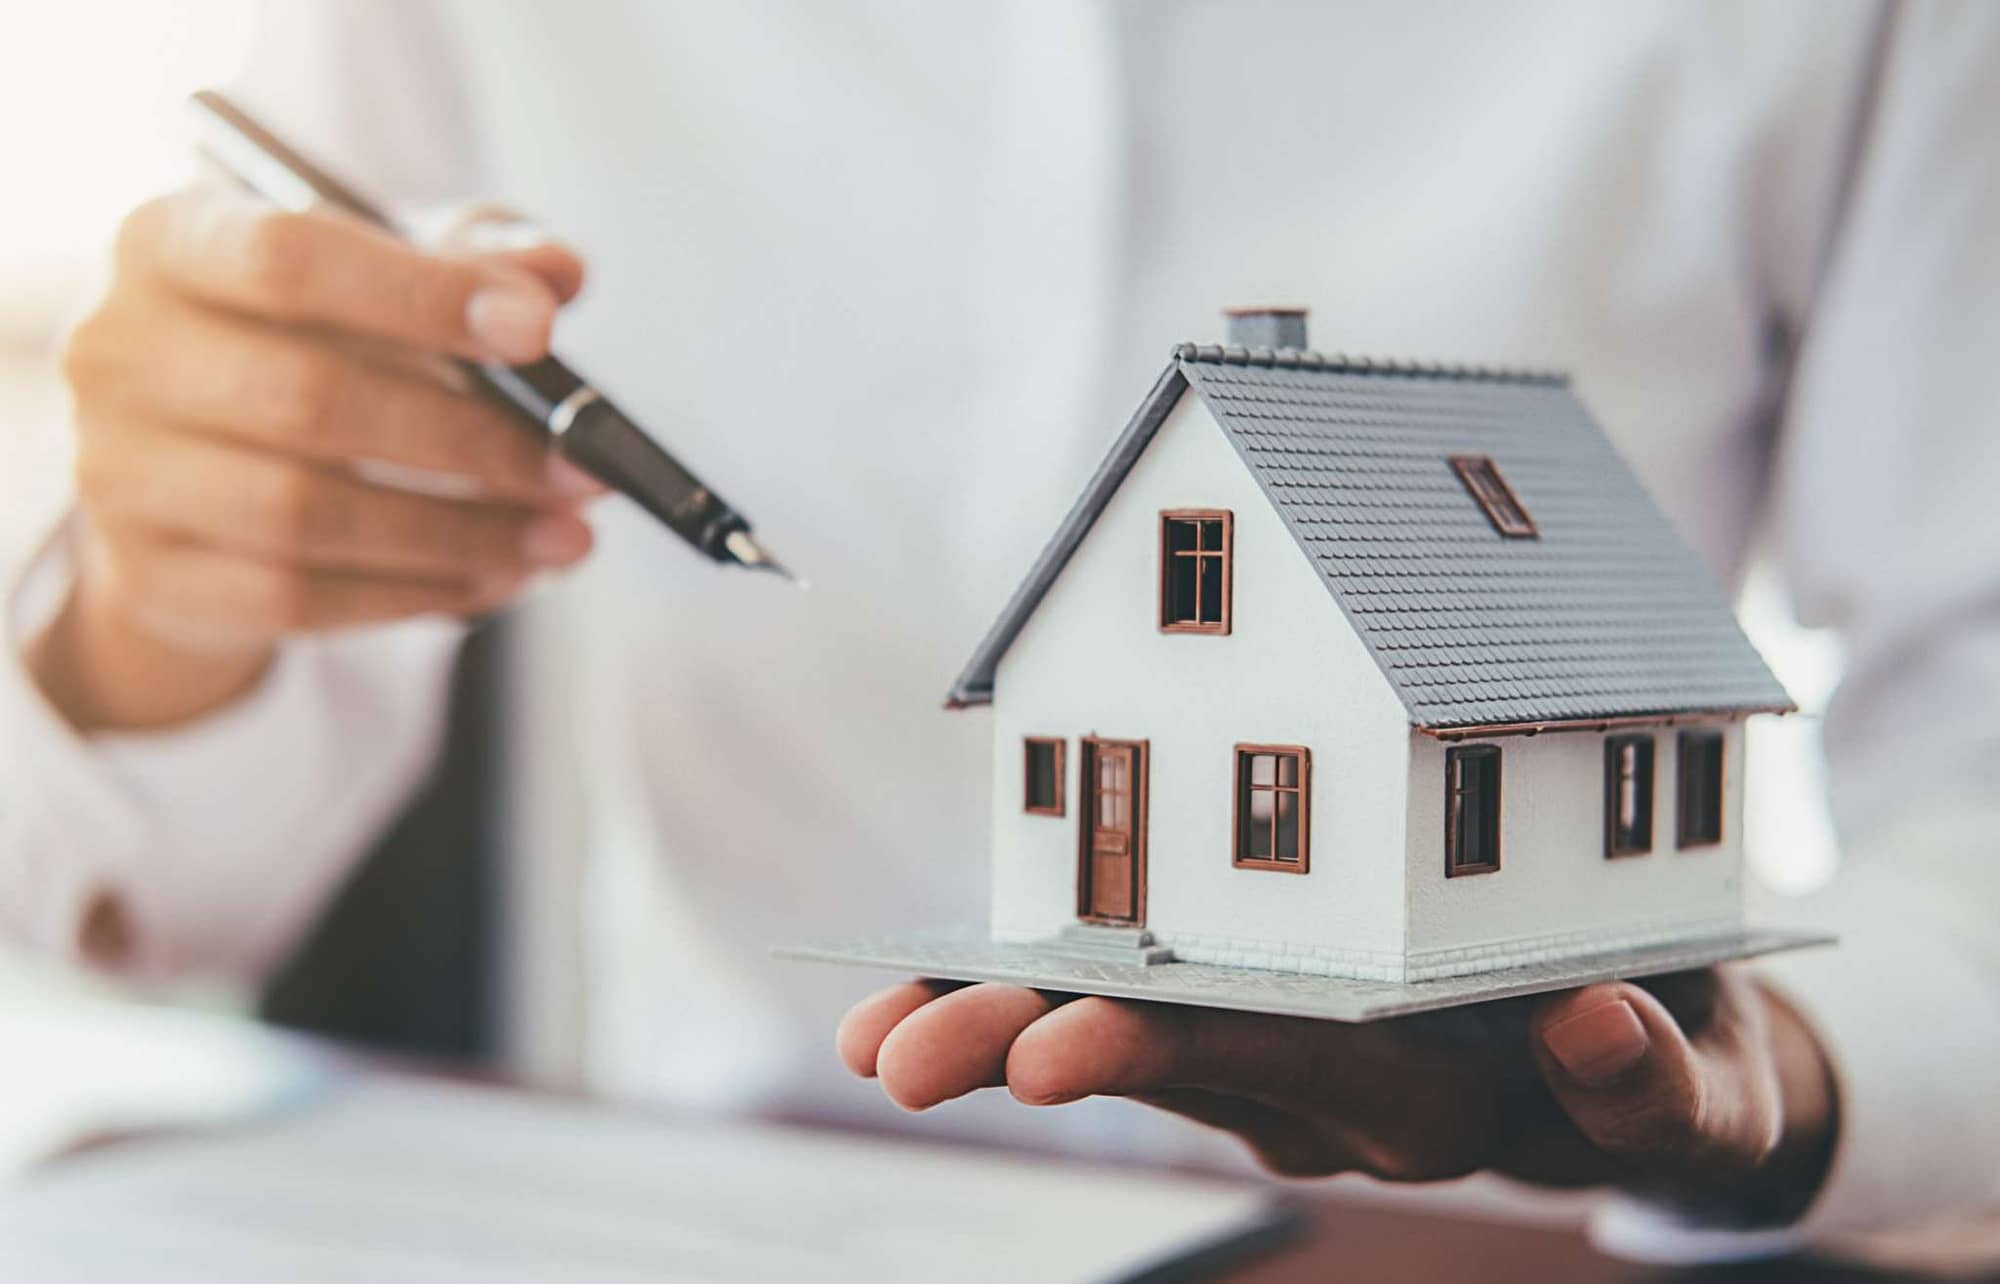 Learn about fall 2021 housing market trends for insurance carriers. | WaterStreet Company